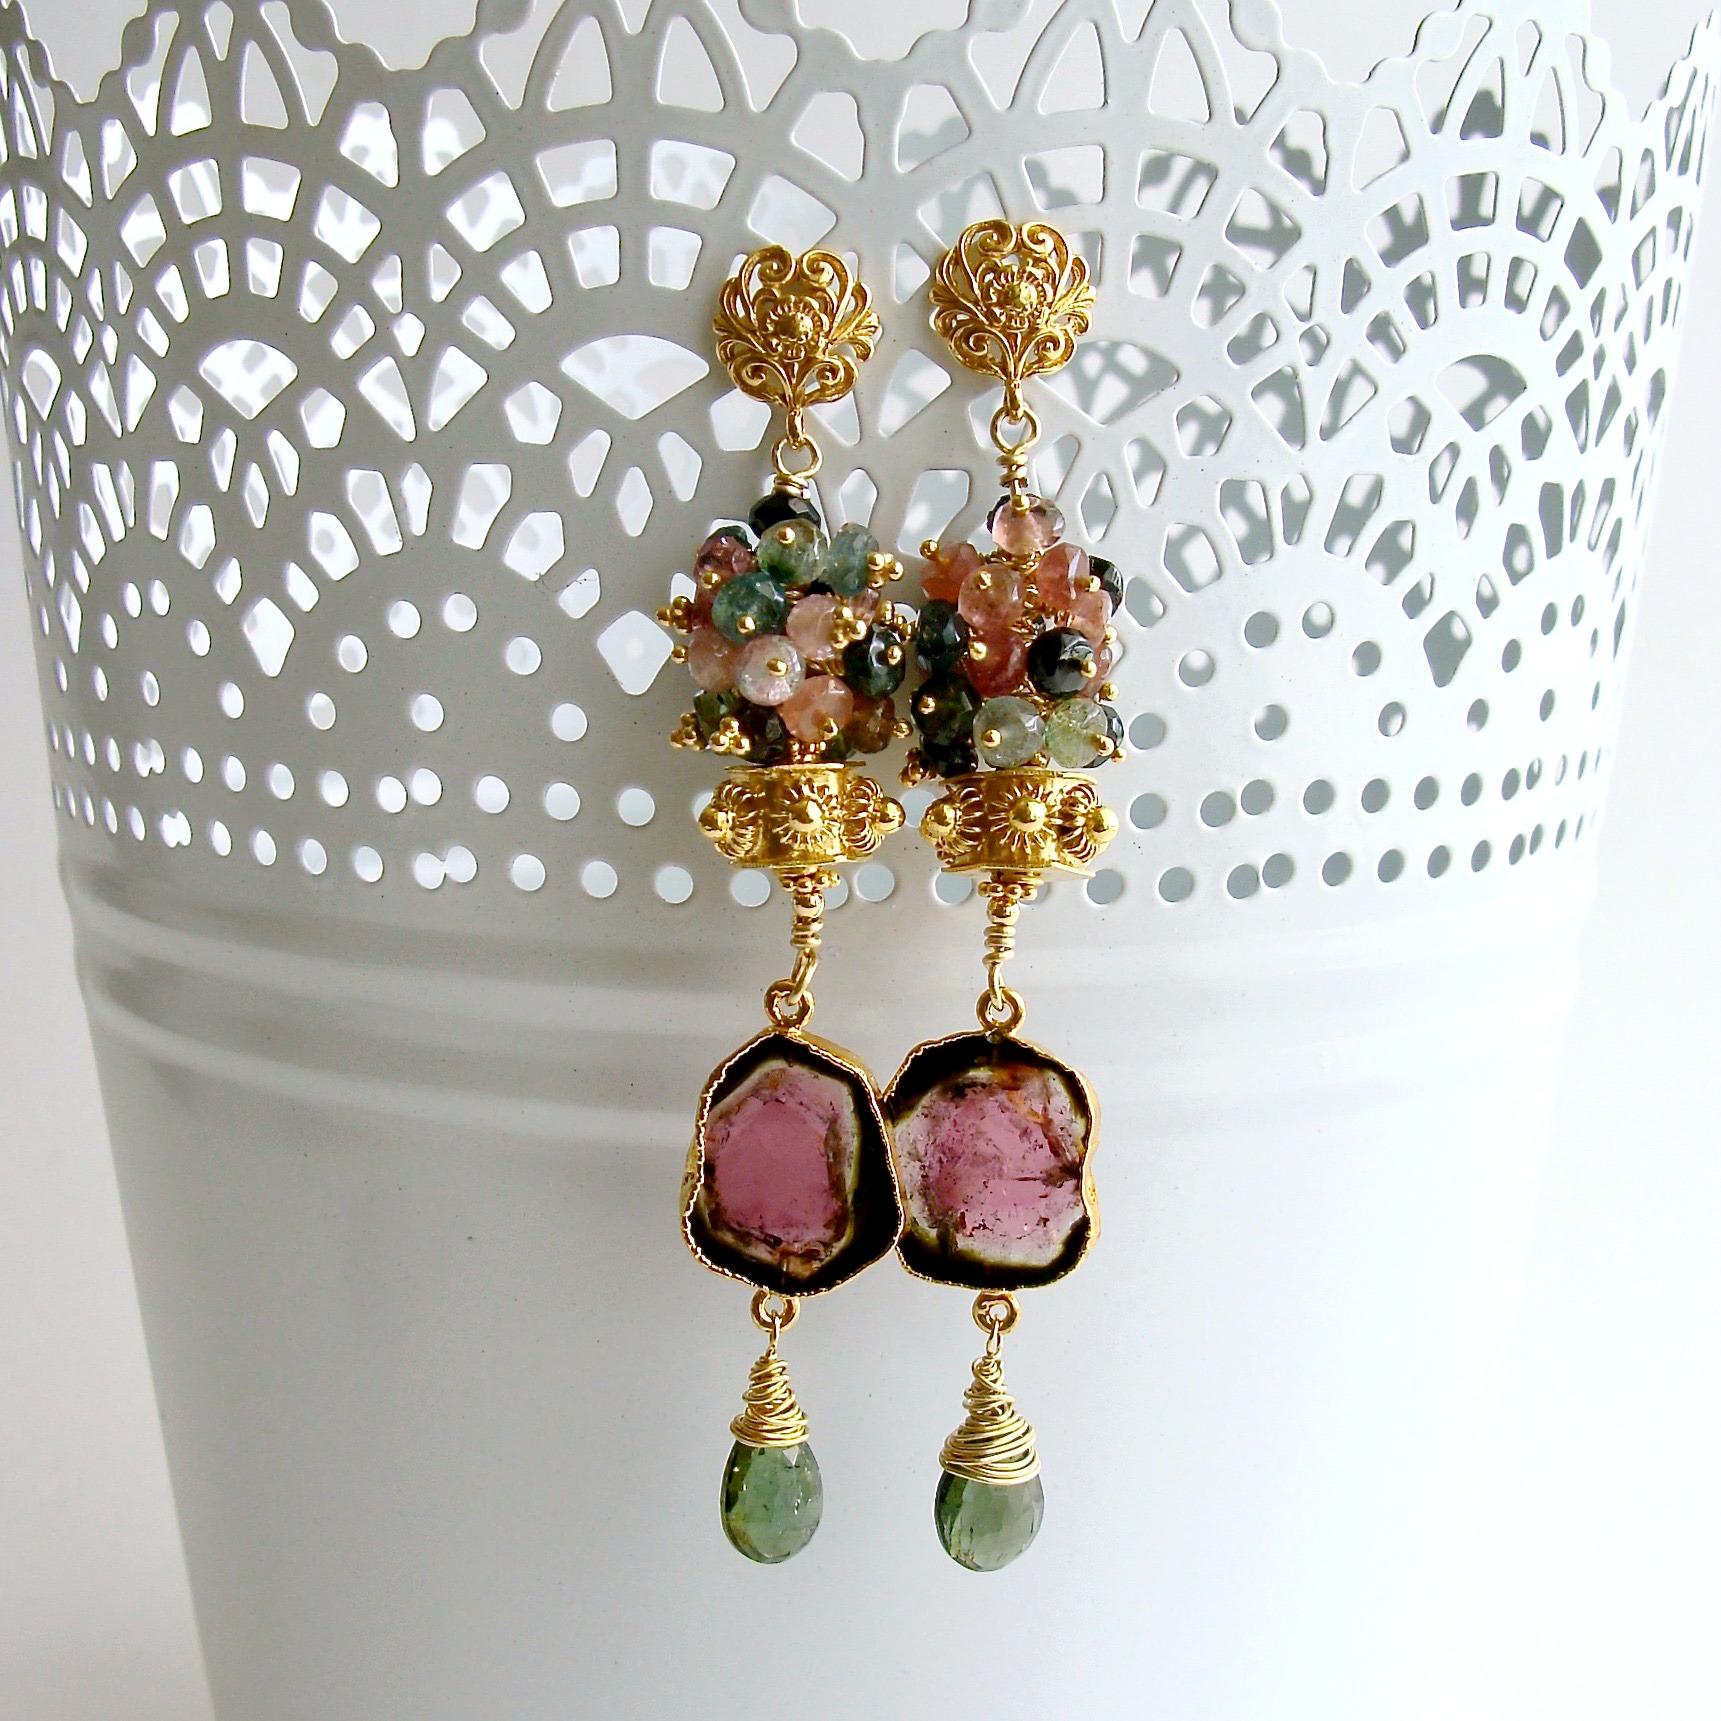 A generous cluster of multi-colored tourmaline rondelles crowns a hexagonal gold vermeil cannetille bead, while coveted watermelon tourmaline slices  and green tourmaline wrapped briolettes dangle sweetly below.  The design is suspended from